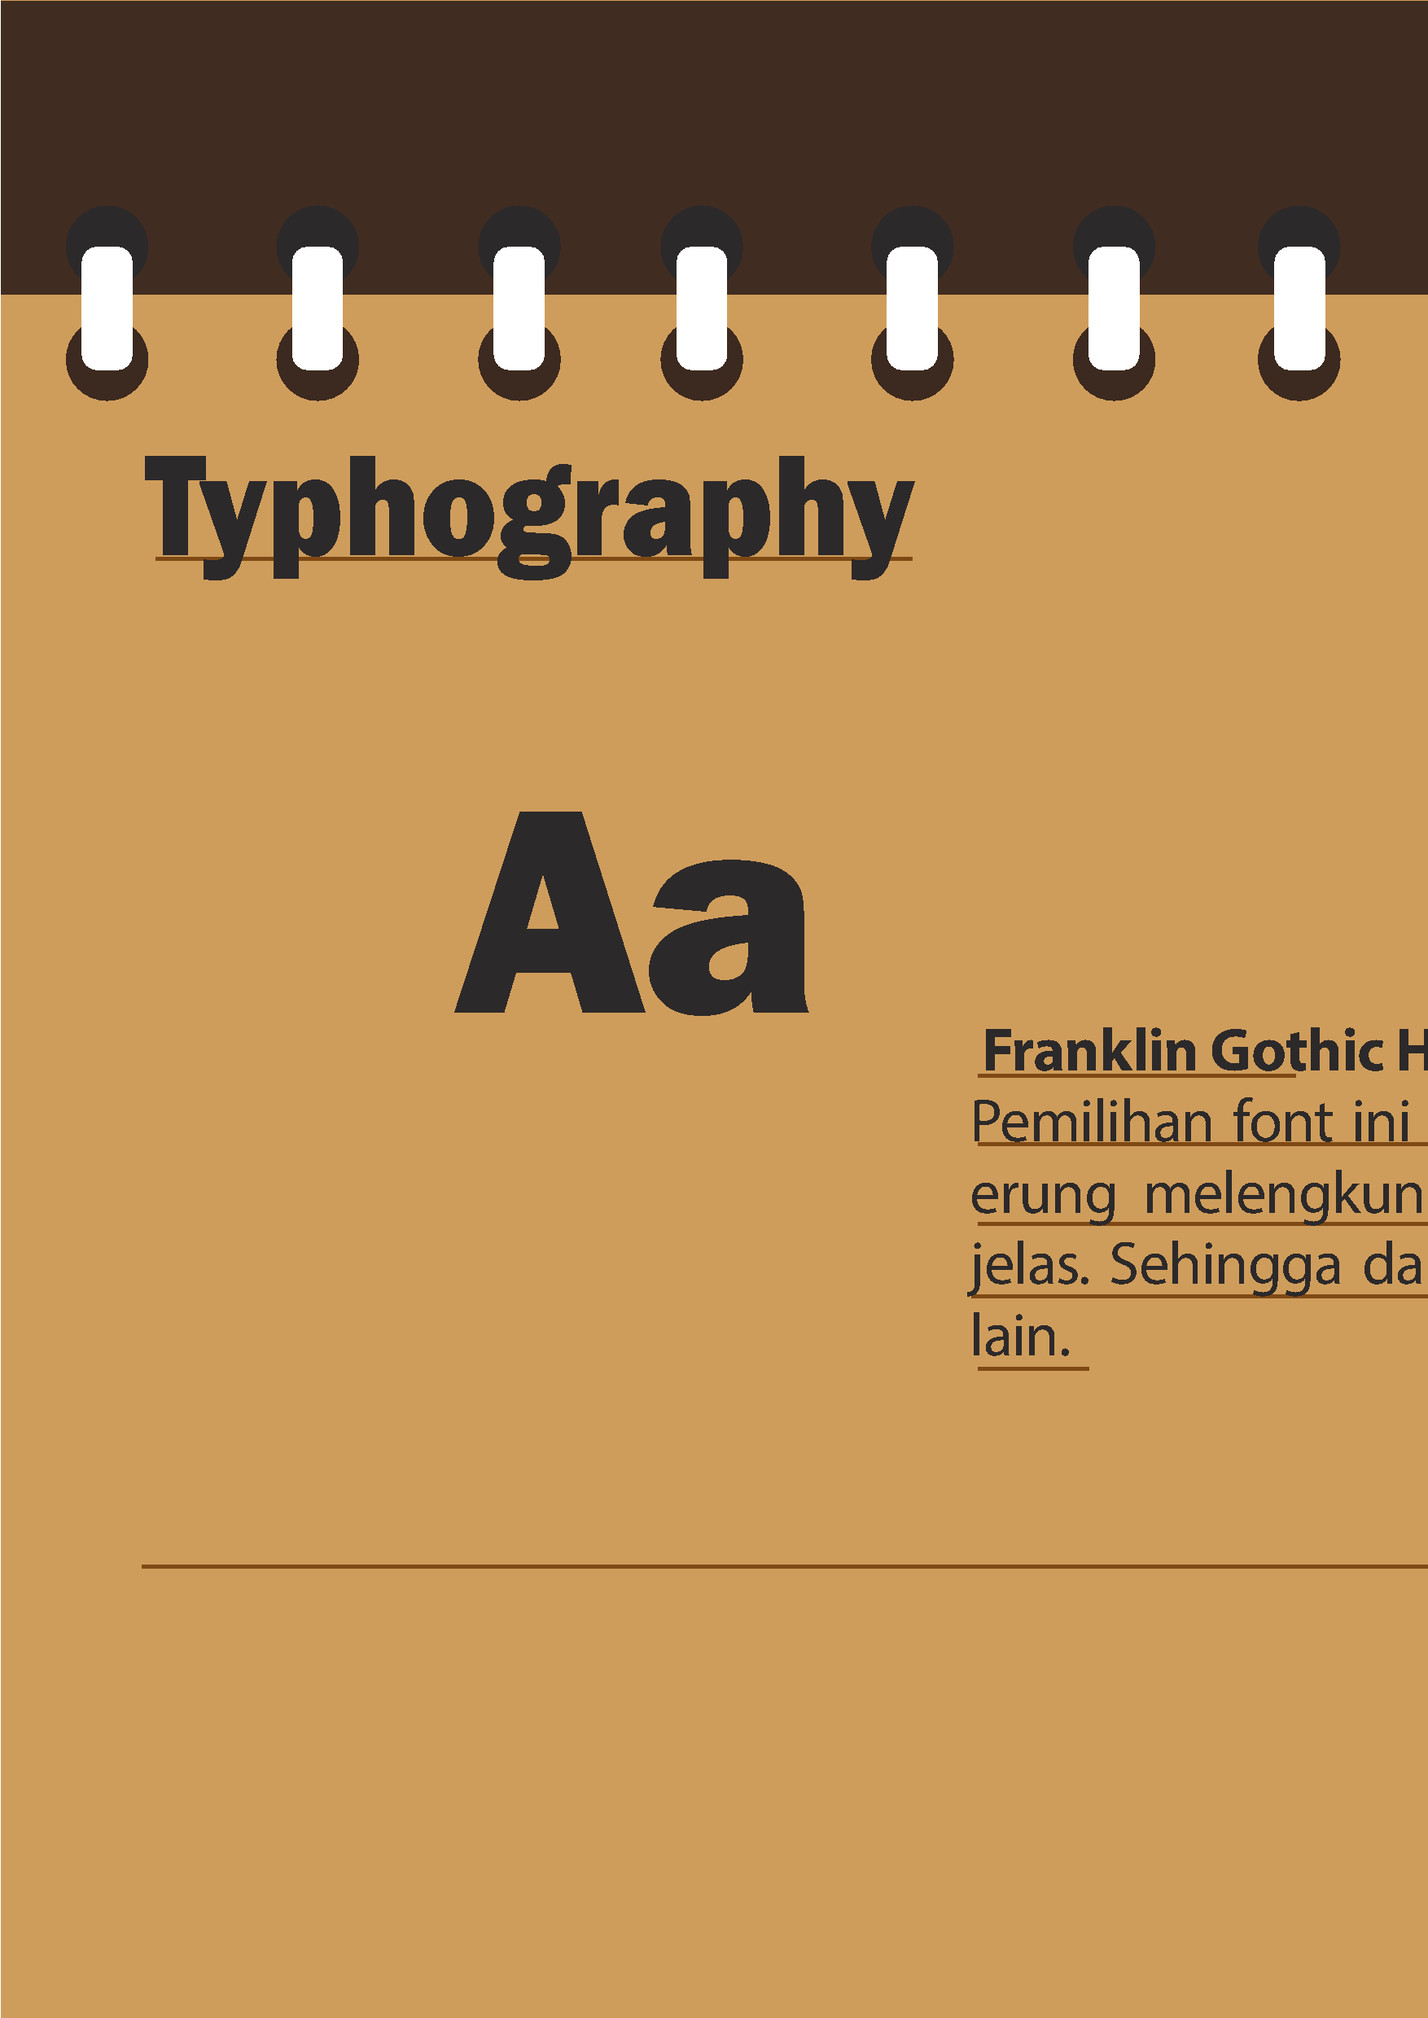 Typhography